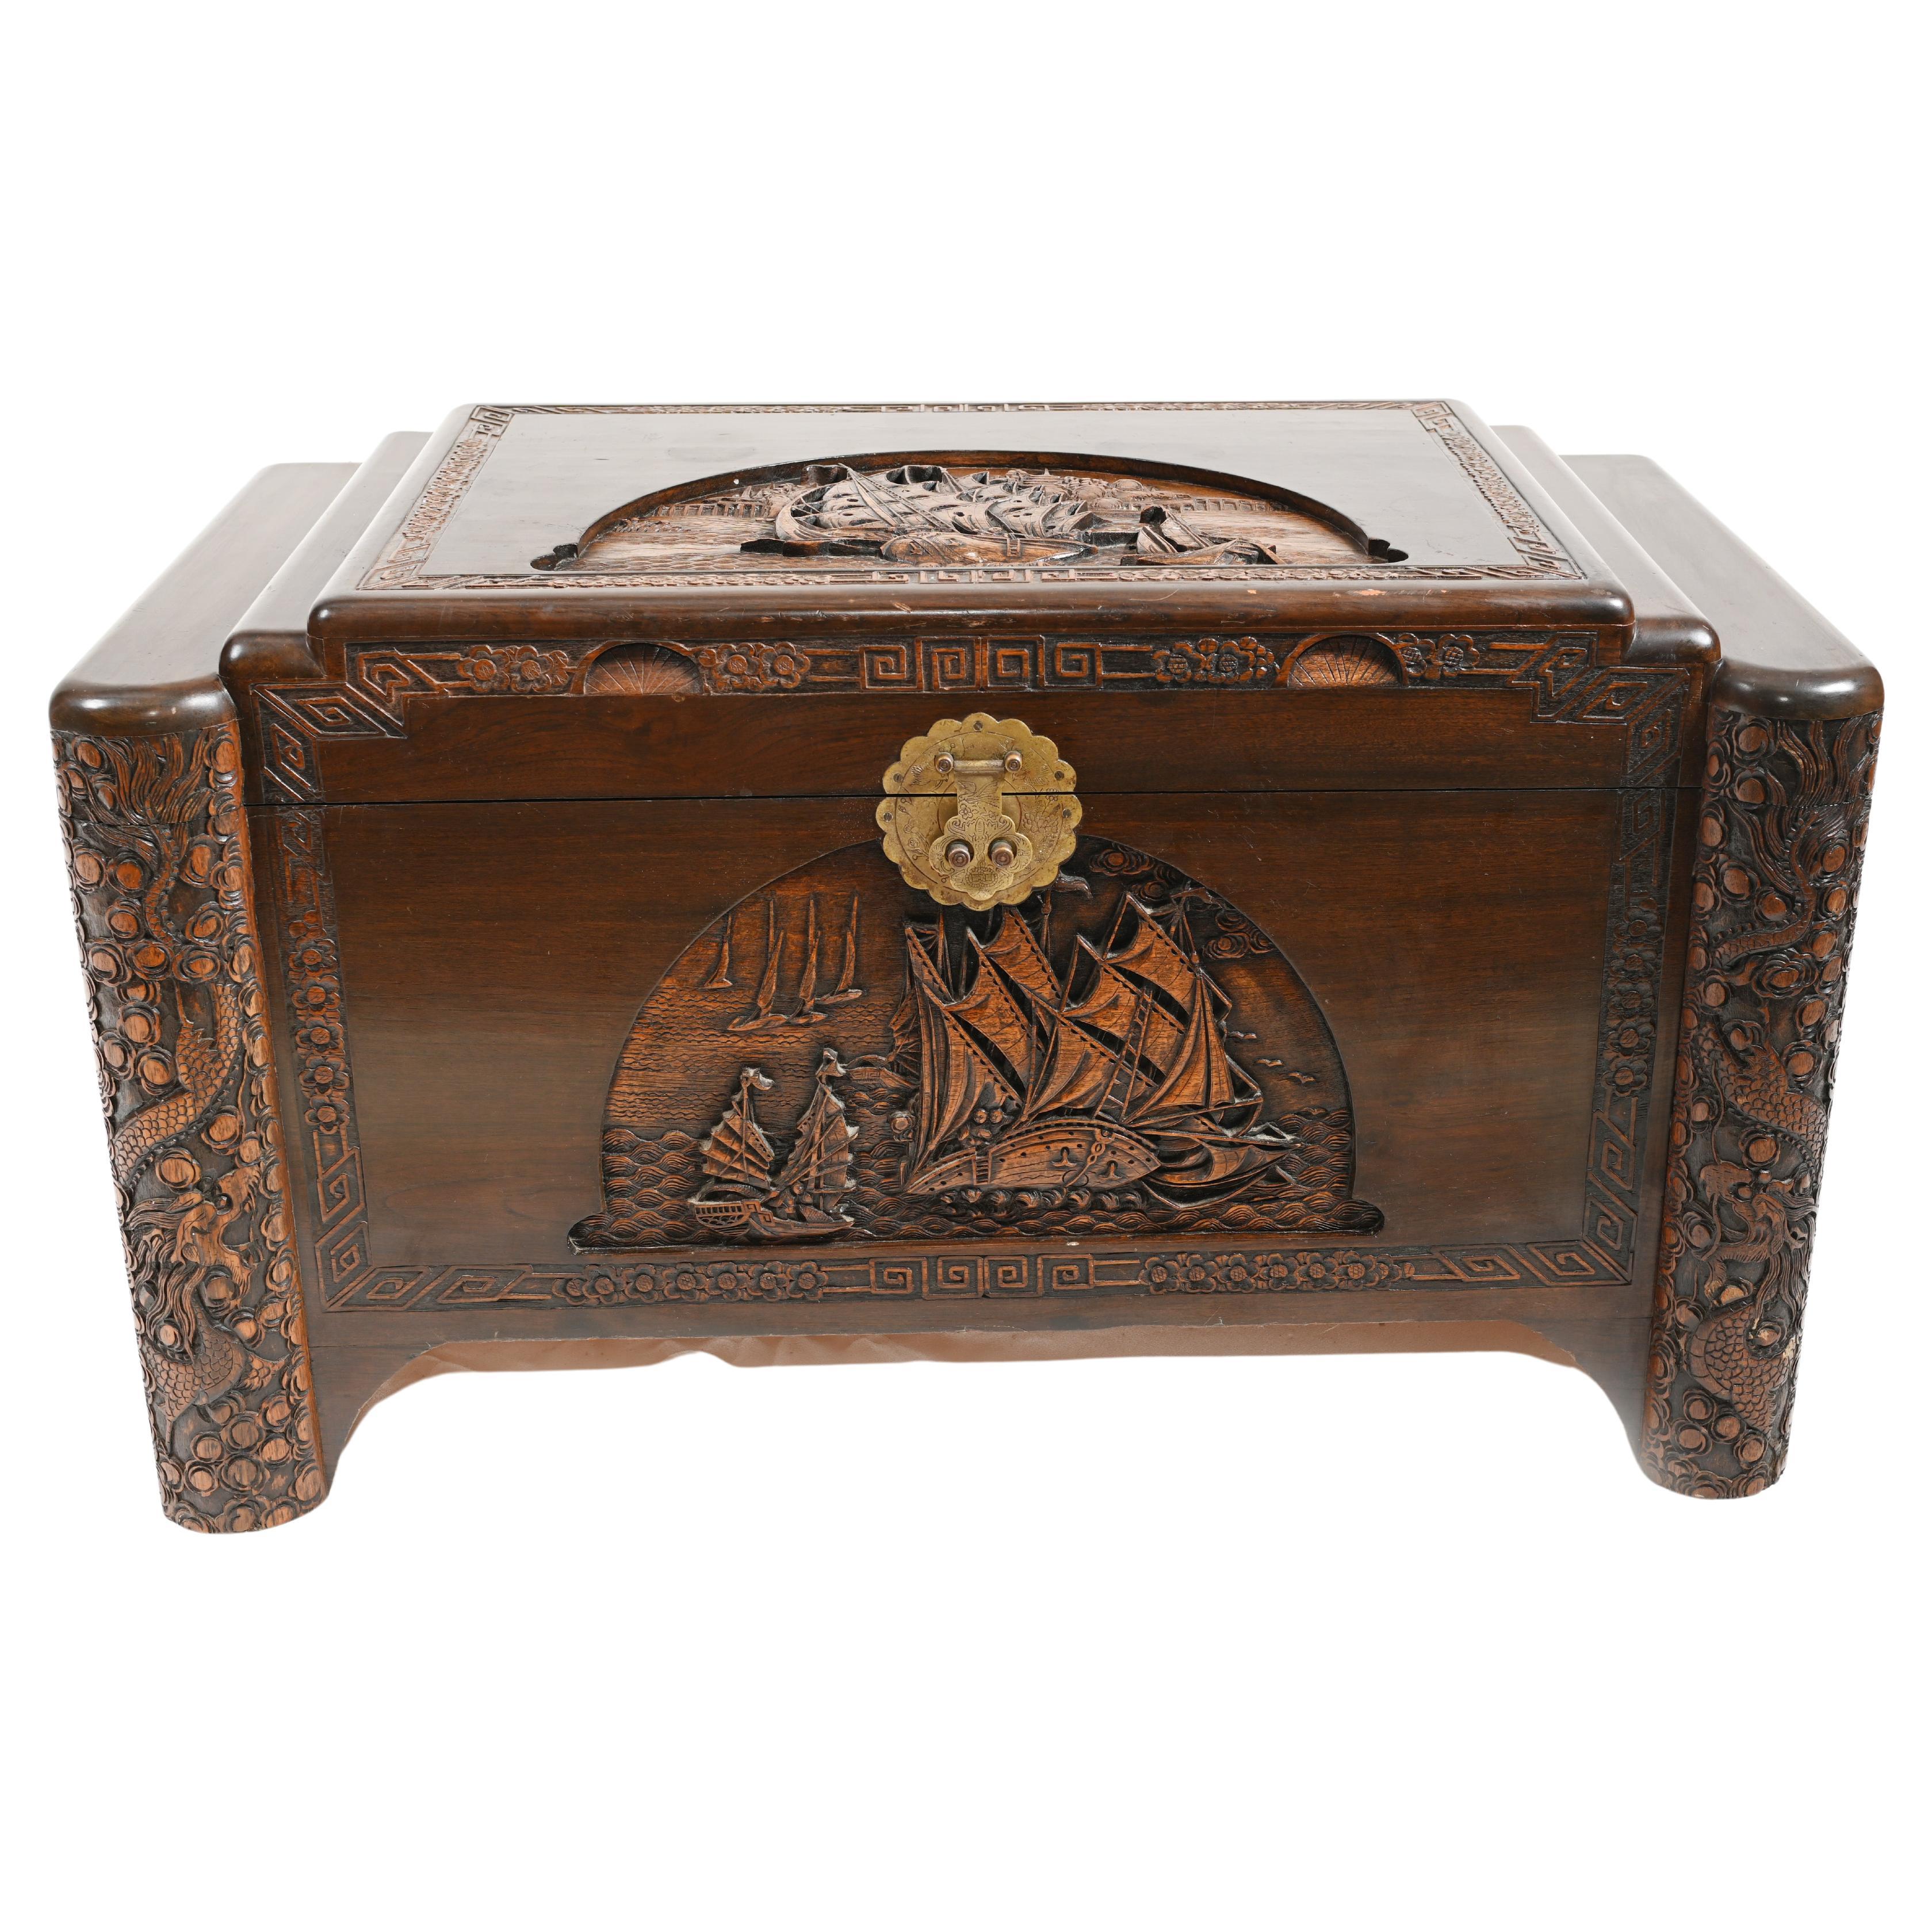 Chinese Camphor Chest Carved Antique Box Trunk Hong Kong